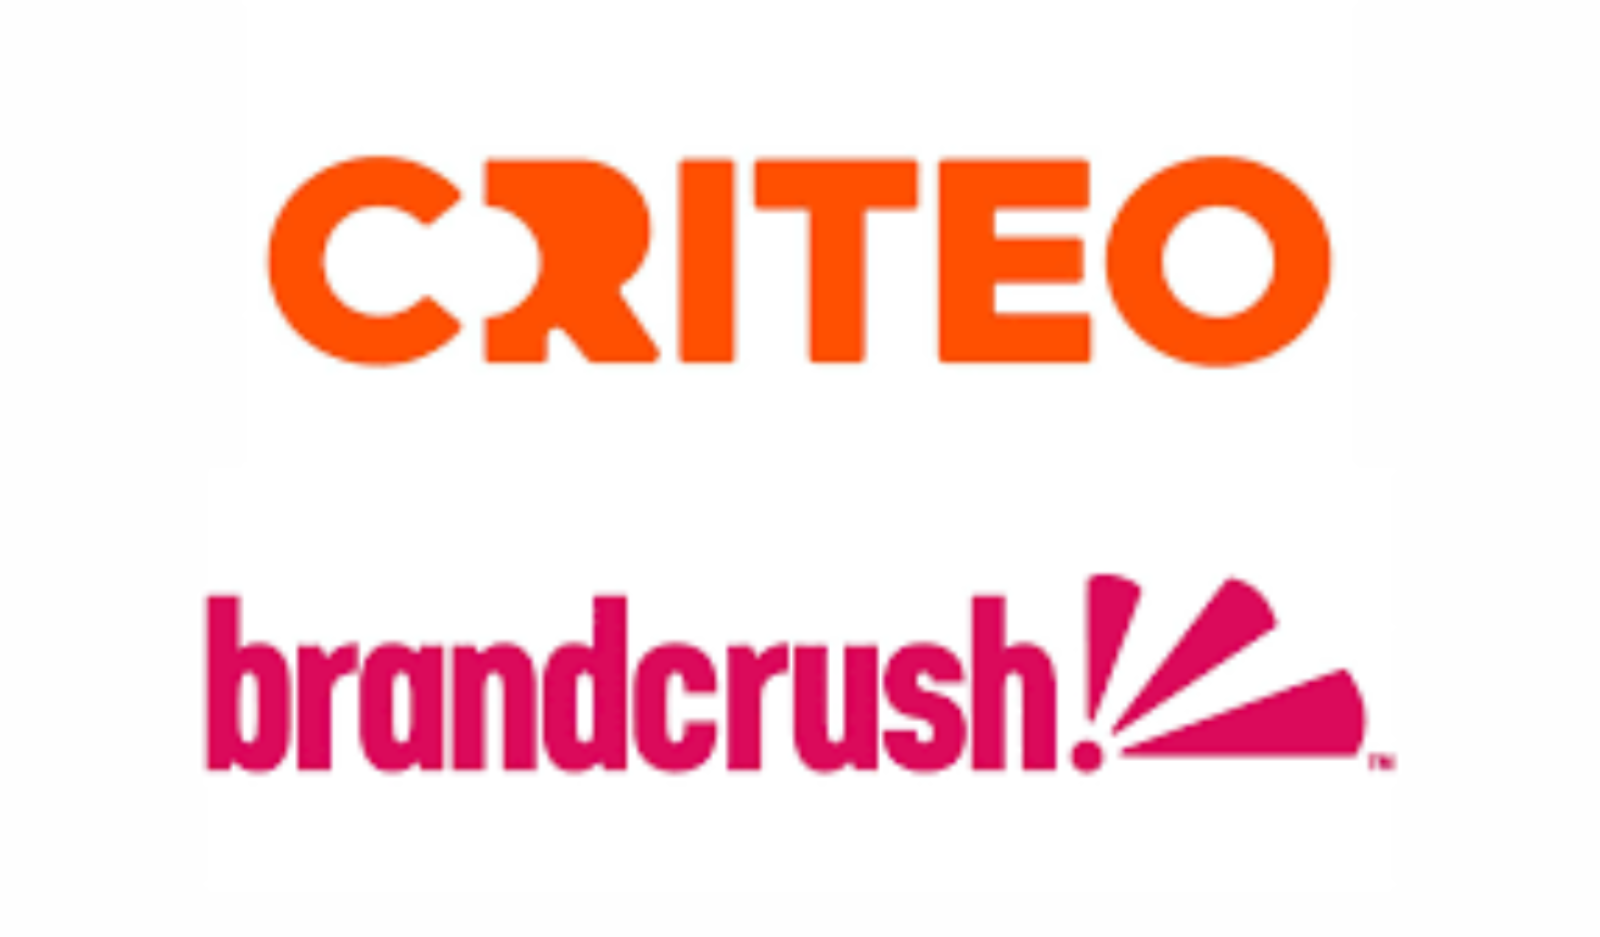 Criteo boosts retail media with Brandcrush buy